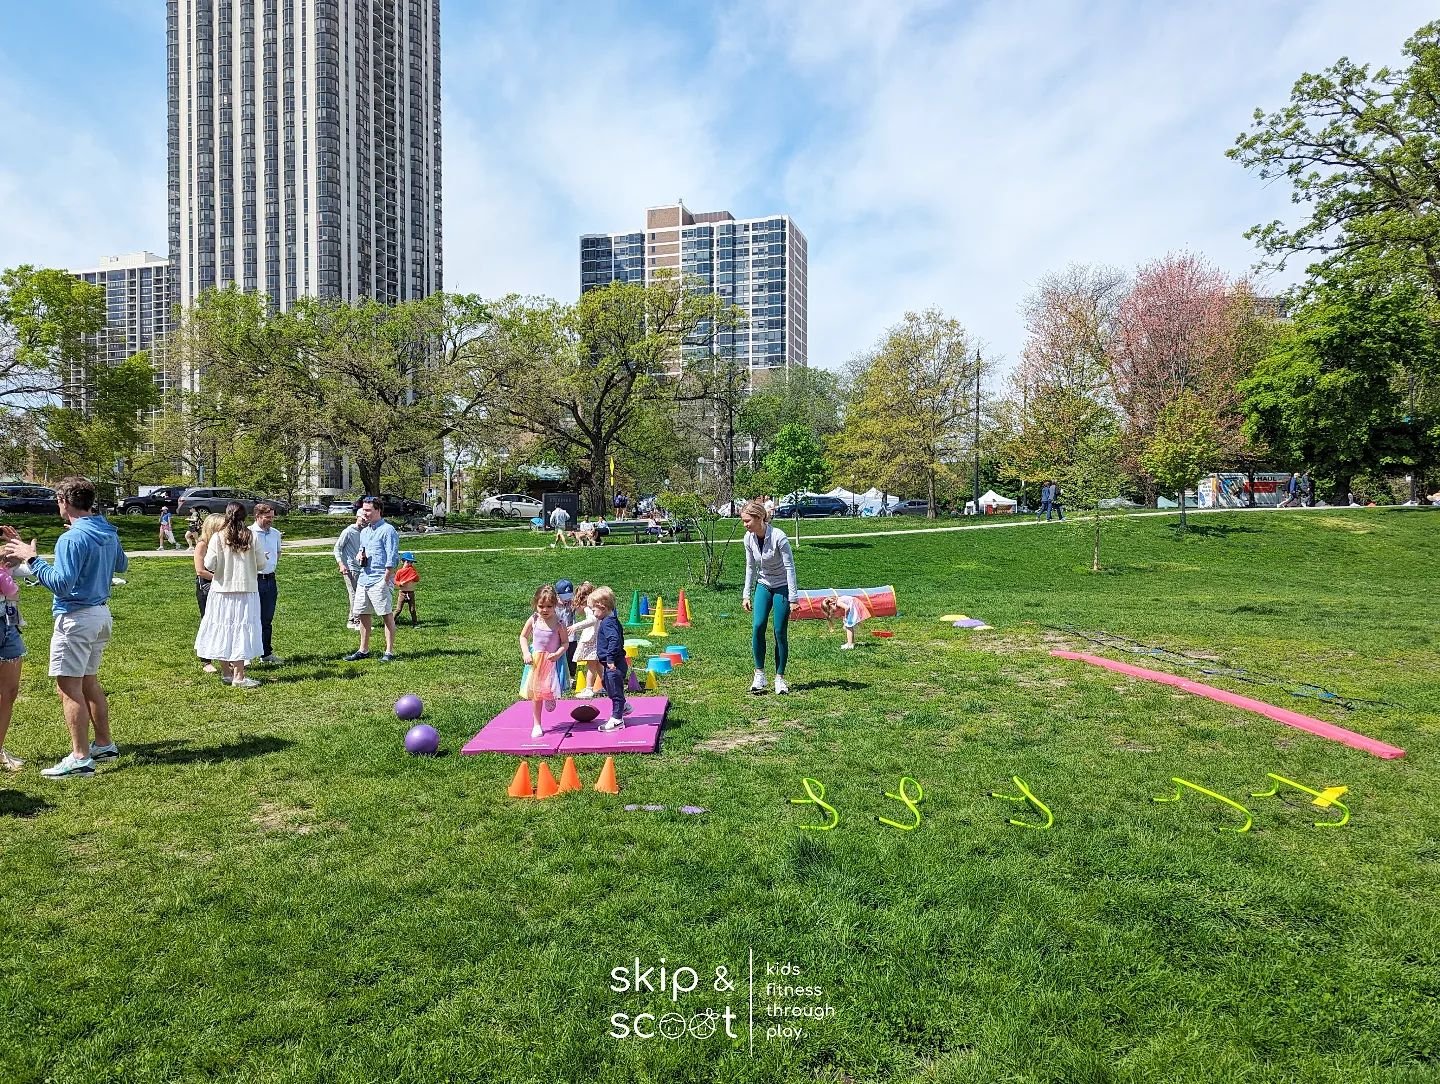 Spectacular day for a @SkipandScoot birthday! Happy birthday to one special little gymnastics-loving #Swiftie! 🥳💖🌷

#skipandscoot #chicagobirthdayparties #chicagokidsactivities #chicagooutdoors #chicagokidsclasses #chicagomommy #chicagokidsclasses